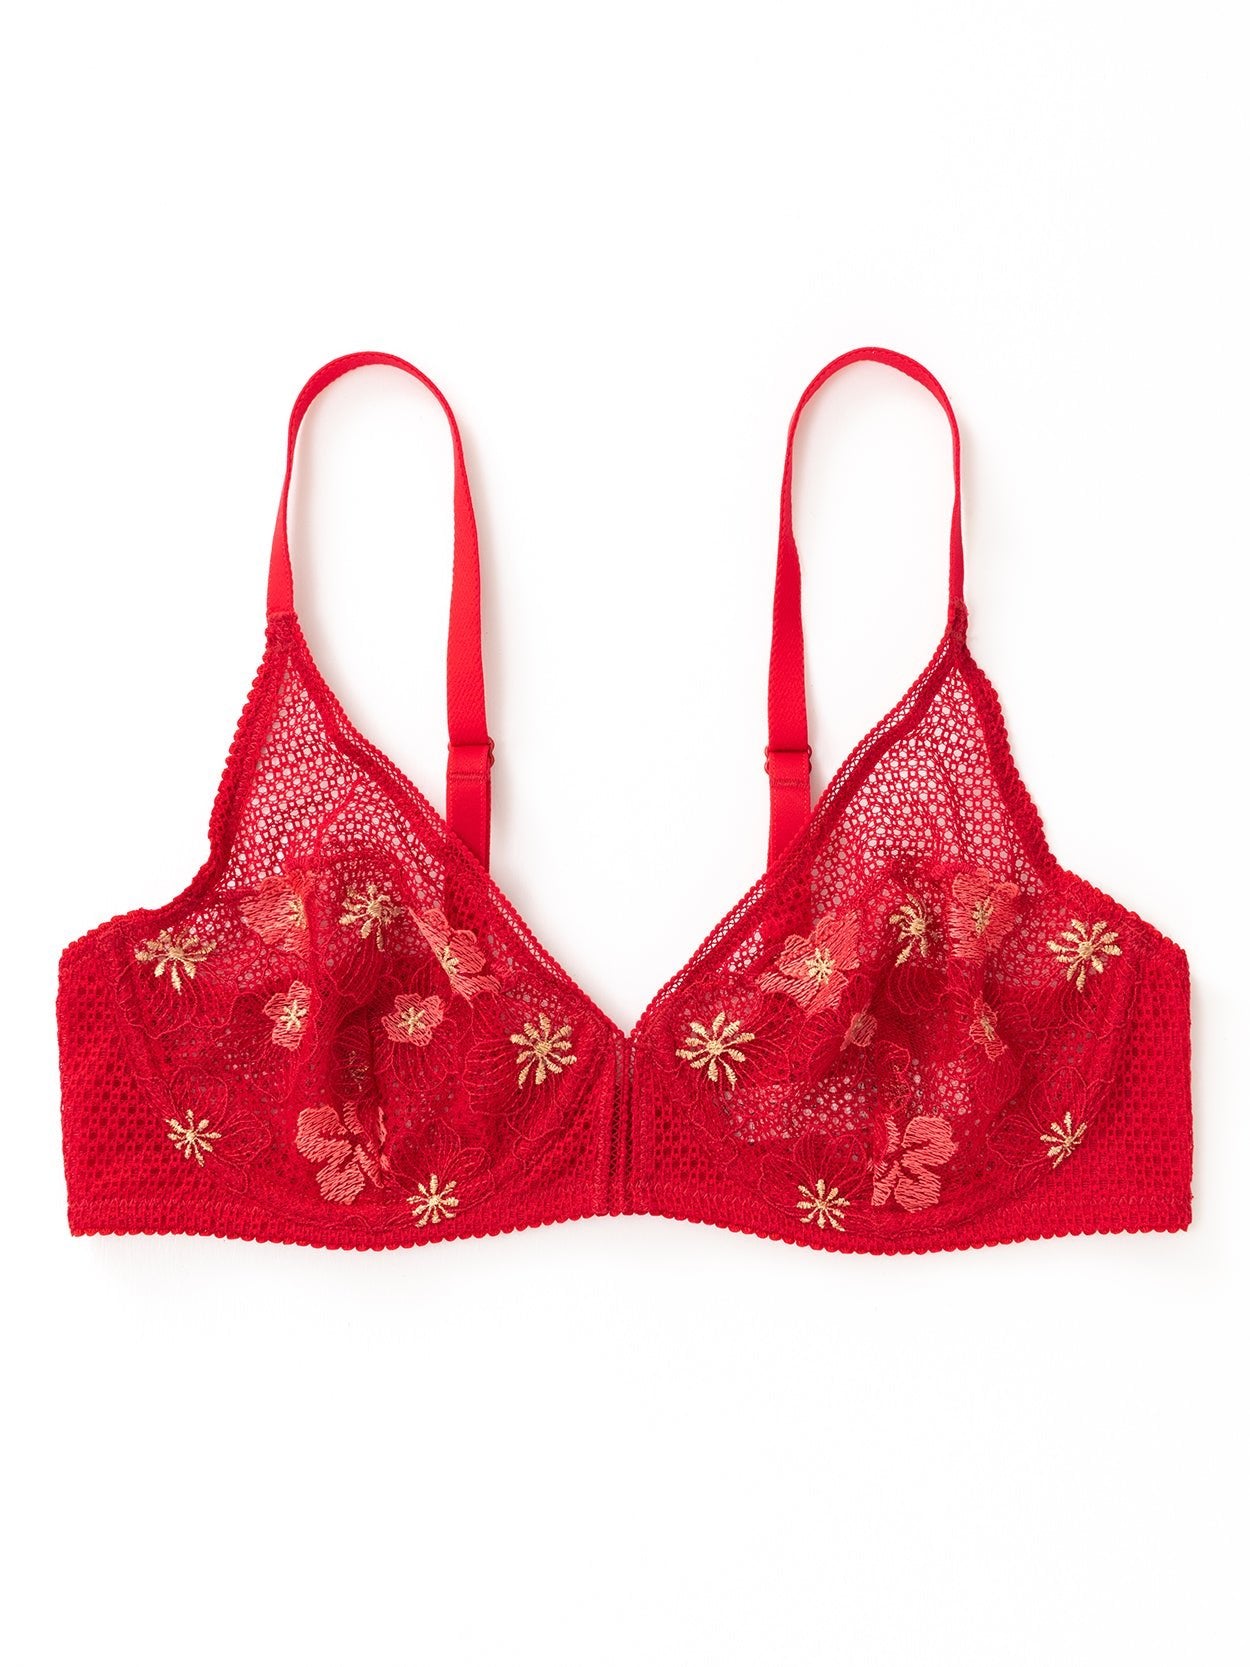 Unlined Embroidered Bra - Red flower embroidered